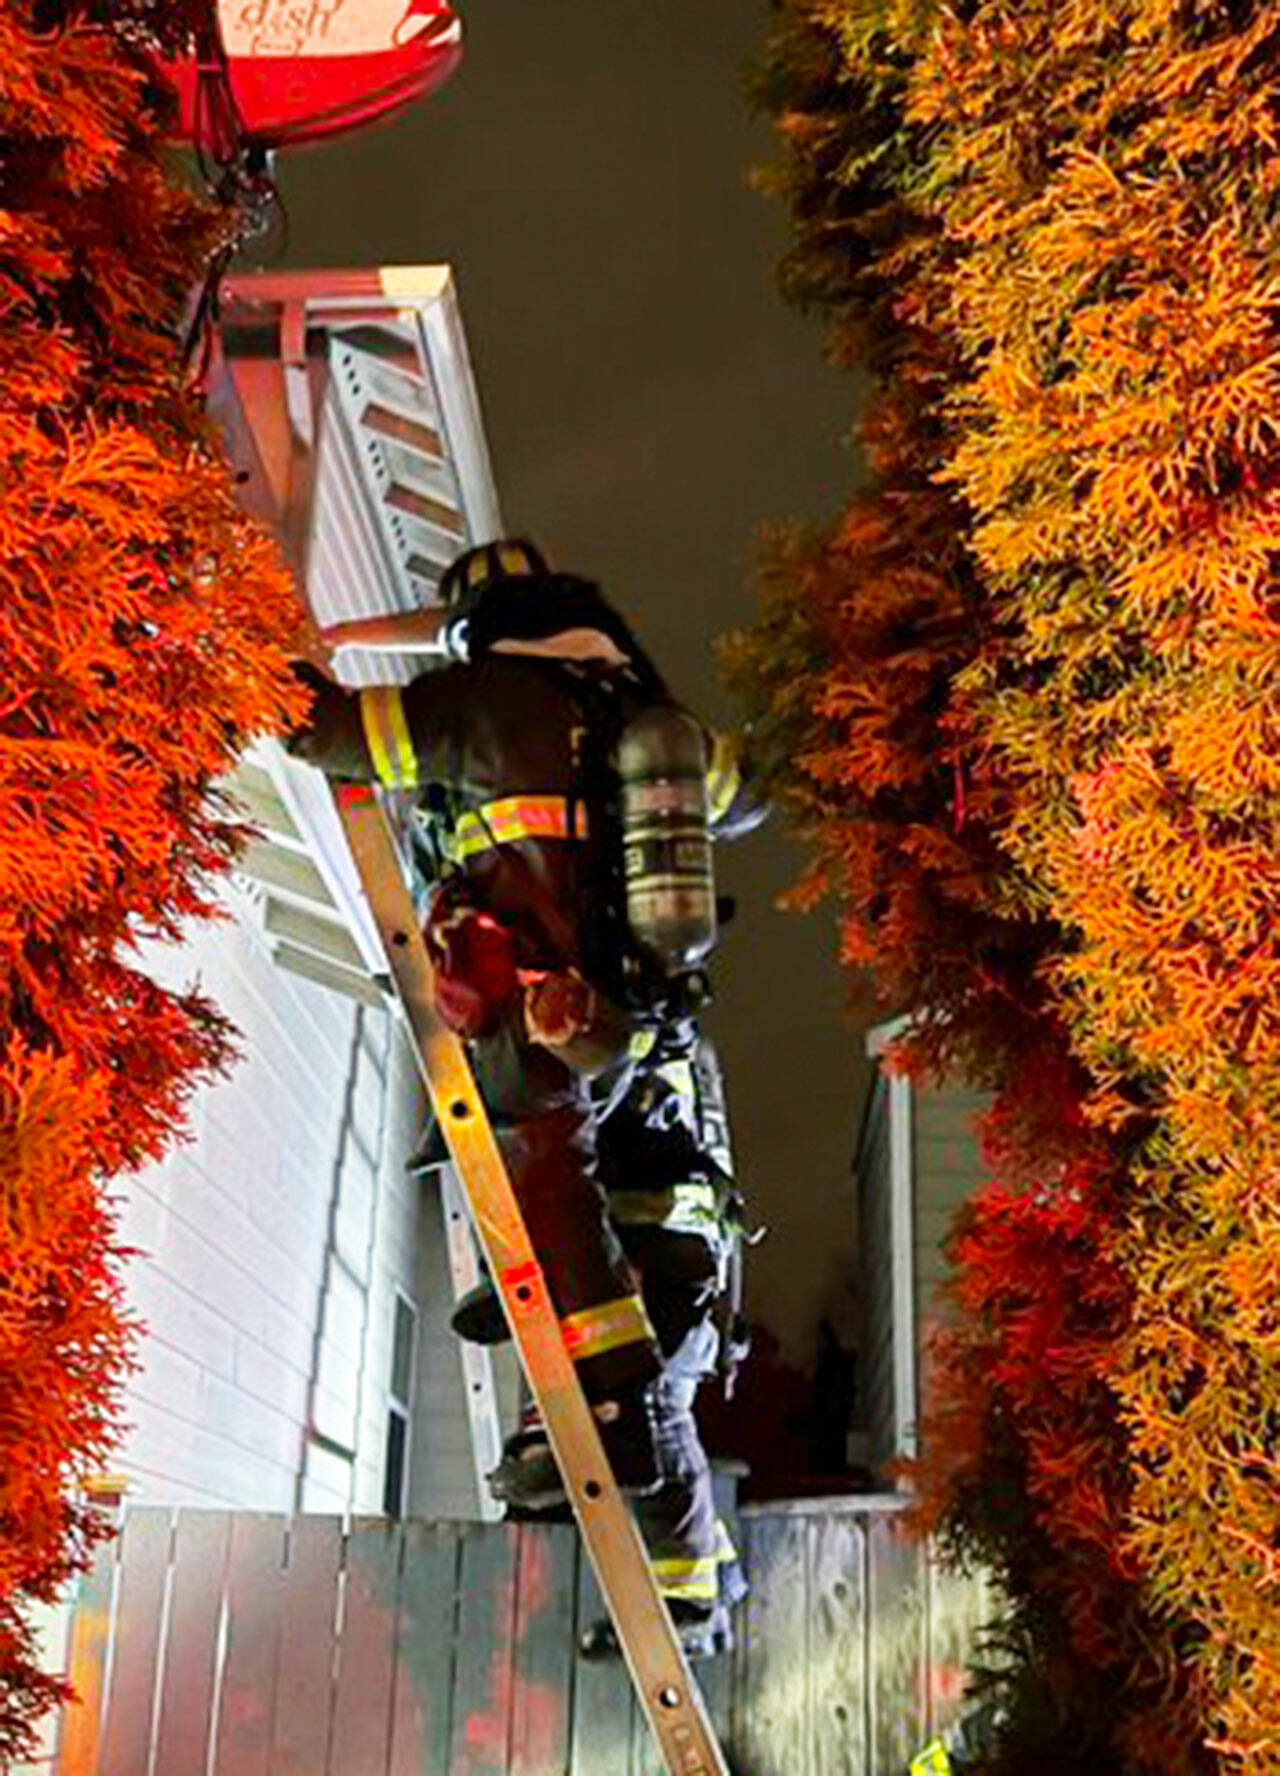 Firefighters scramble up ladders to rescue a male from the roof of a Kent house fire Tuesday night, March 19 in the 12400 block of SE 259th St. COURTESY PHOTO, Puget Sound Fire